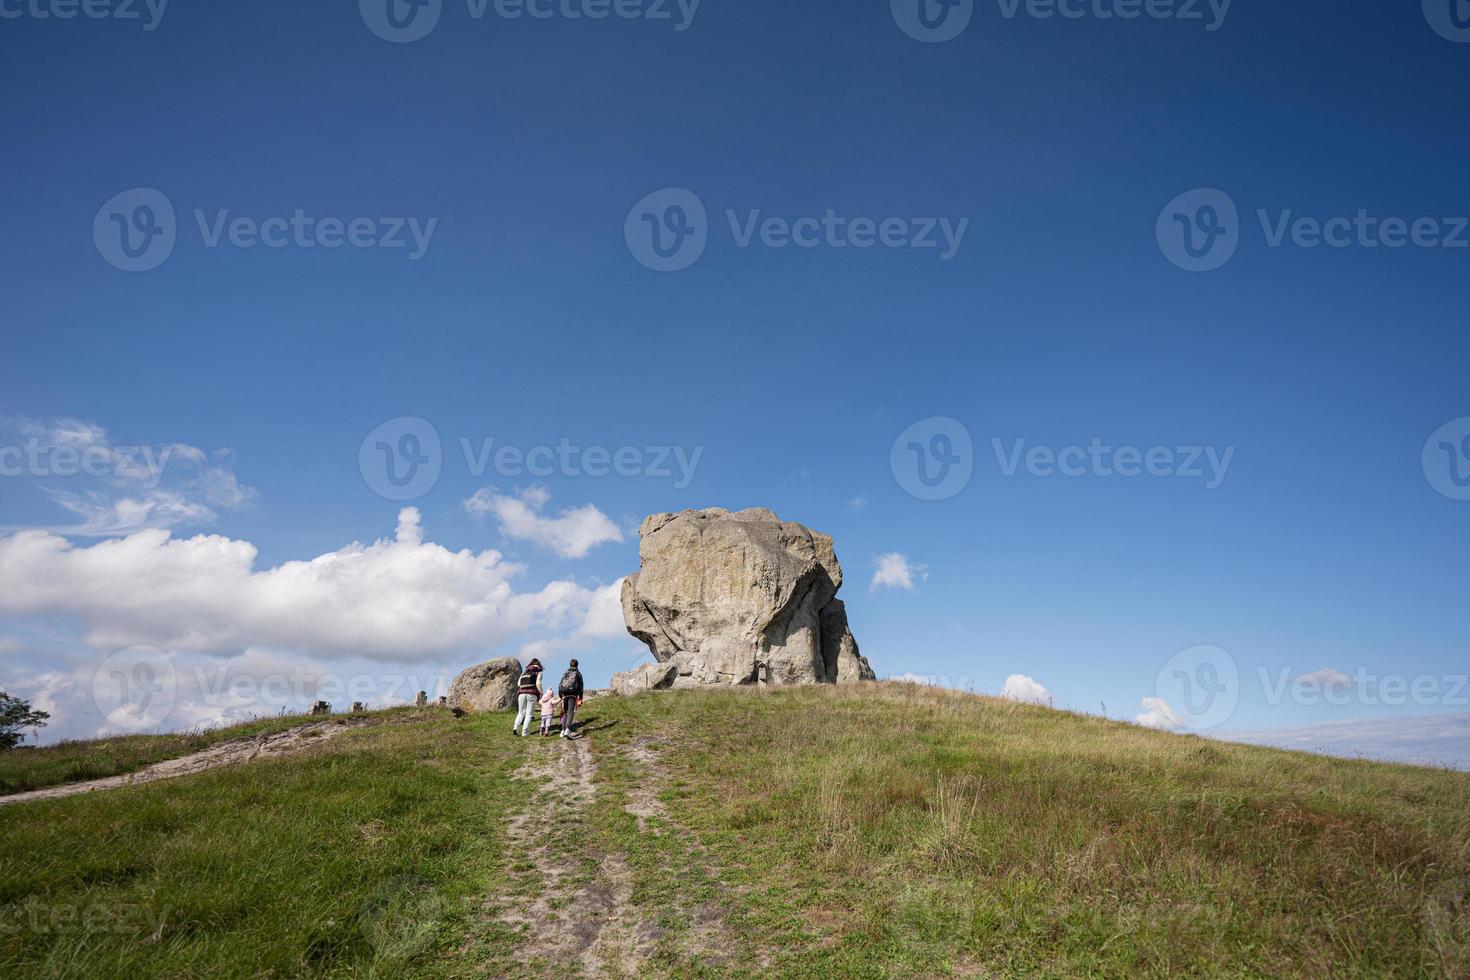 Kids exploring nature. Children wear backpack hiking with mother near big stone in hill. Pidkamin, Ukraine. photo